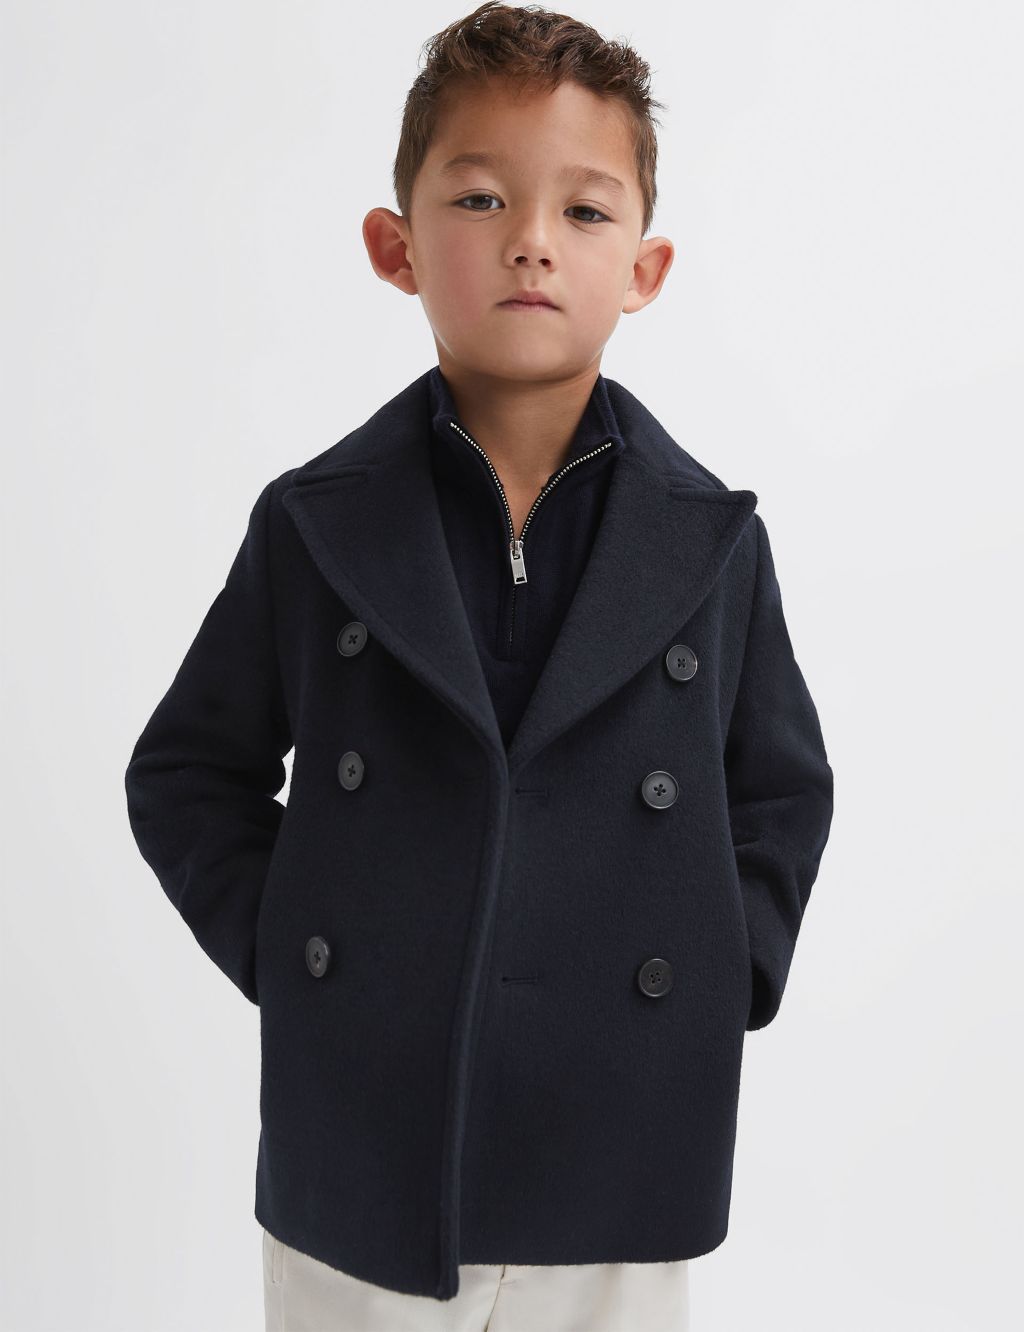 Wool Blend Double Breasted Jacket (4-14 Yrs) image 1